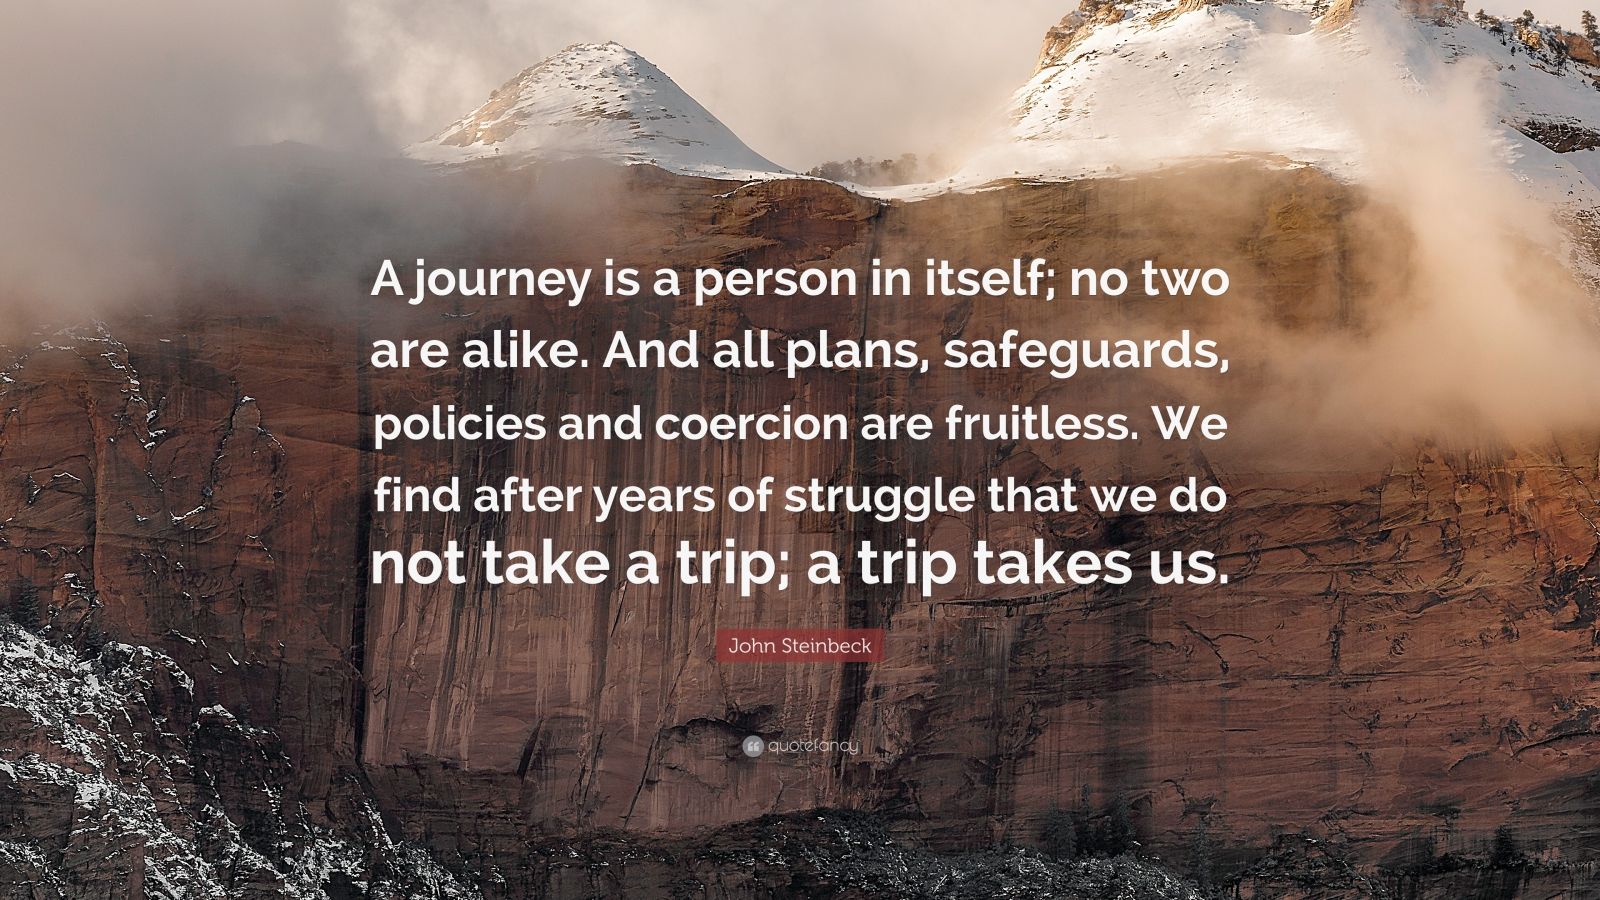 John Steinbeck Quote: “A journey is a person in itself; no two are ...